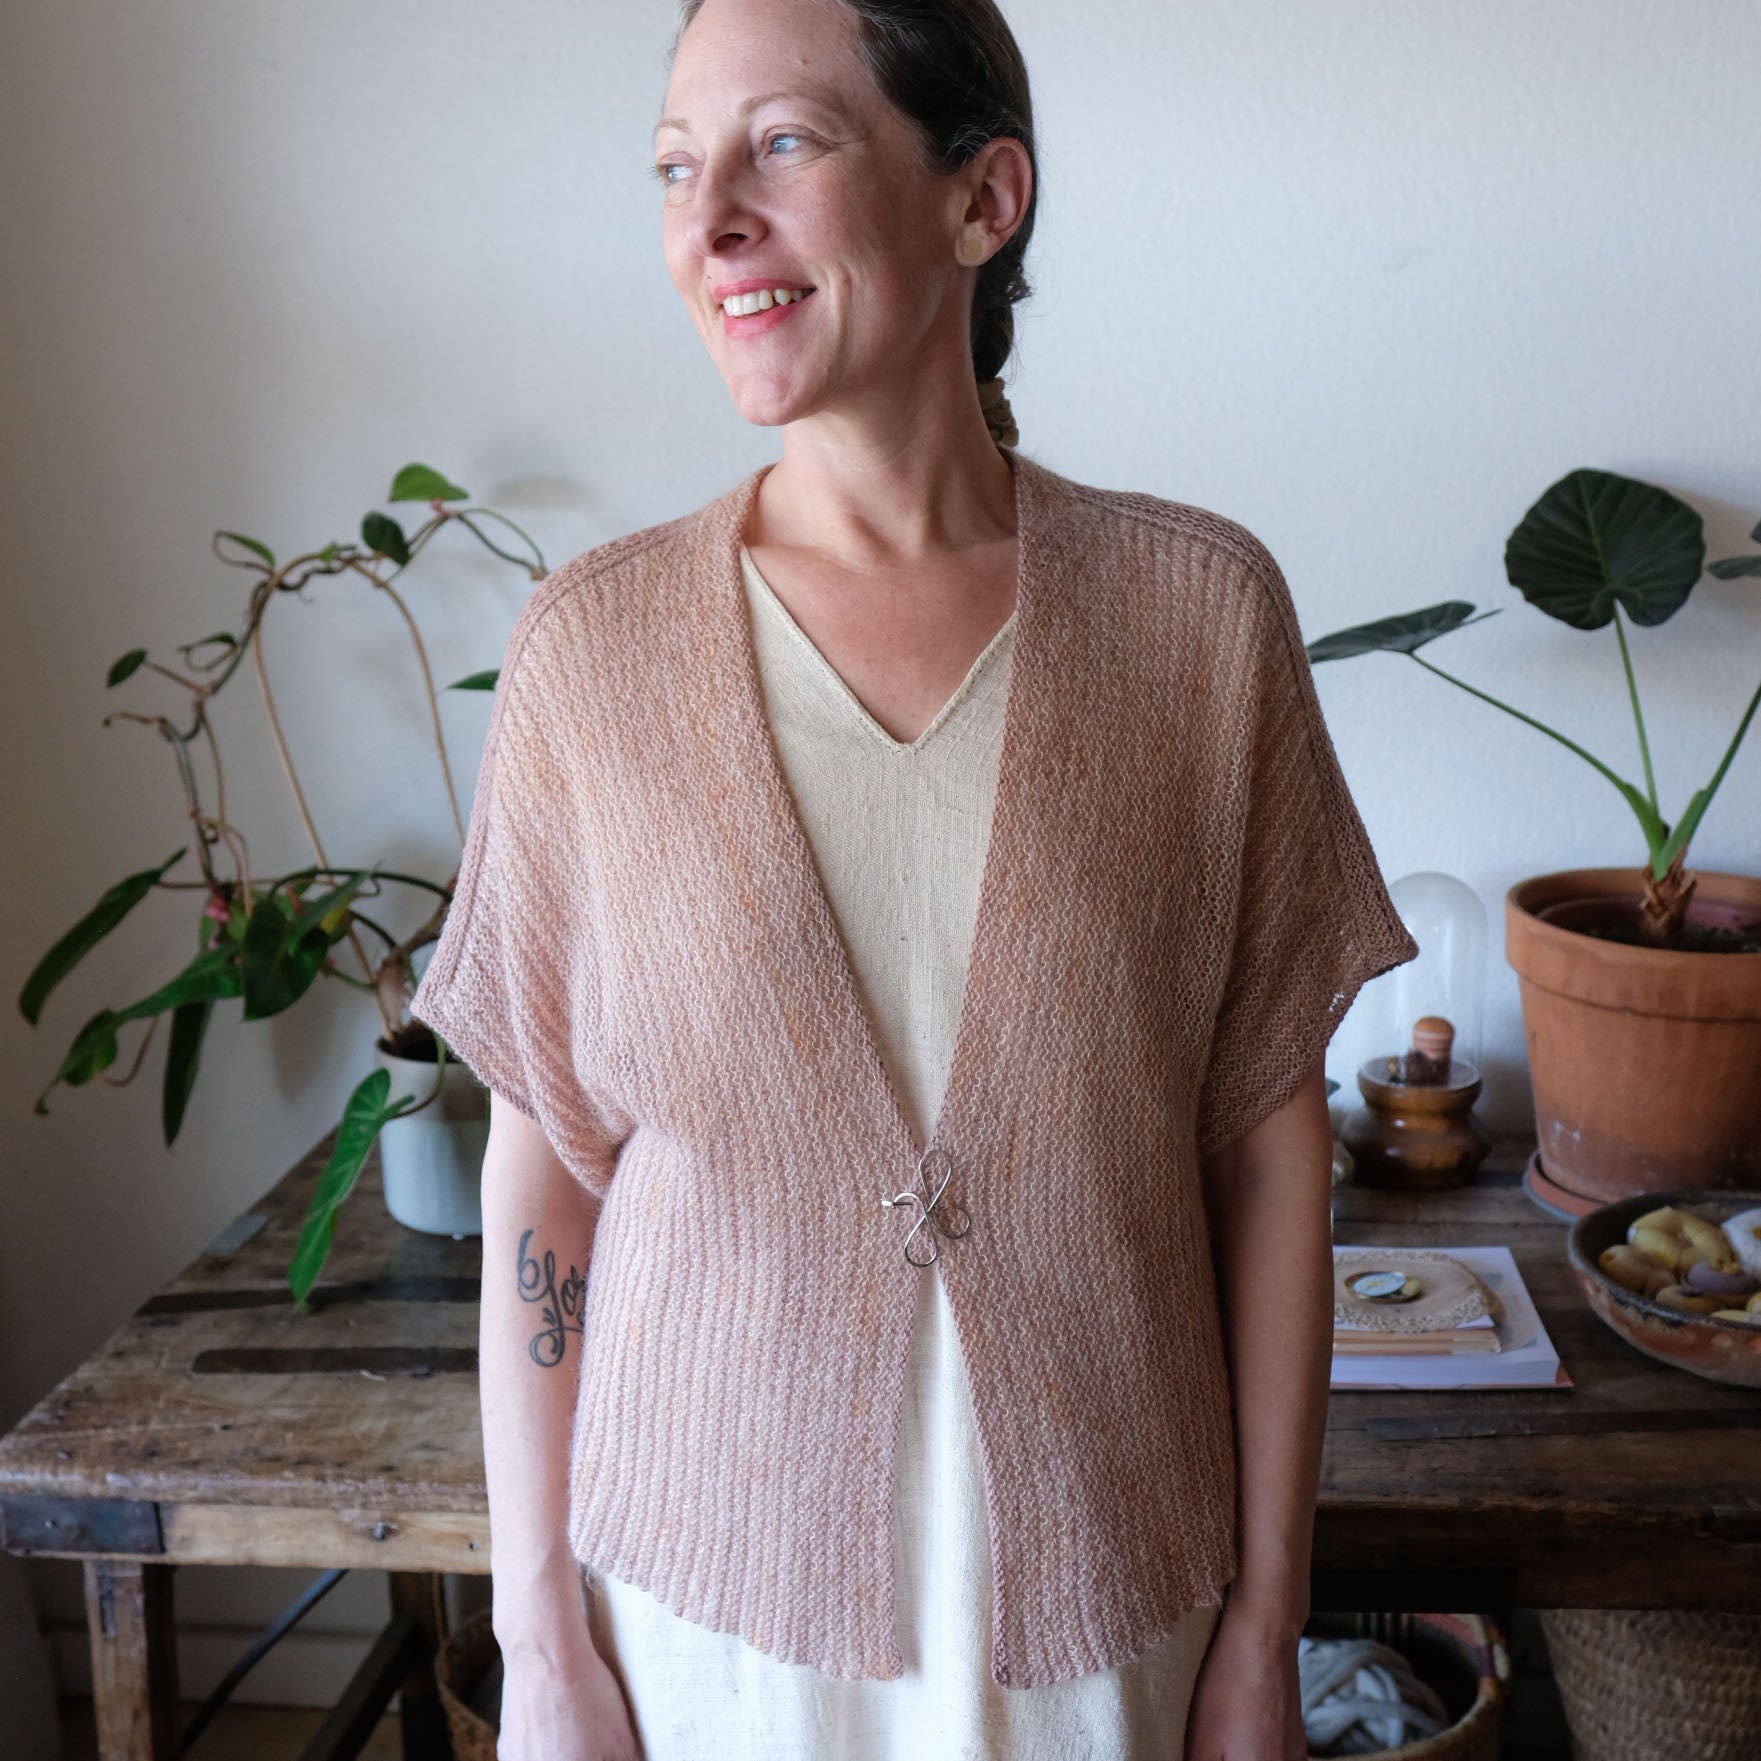 AVFKW x Romi Hill - Swoop Softly Sweater Kit - Dye-to-Order